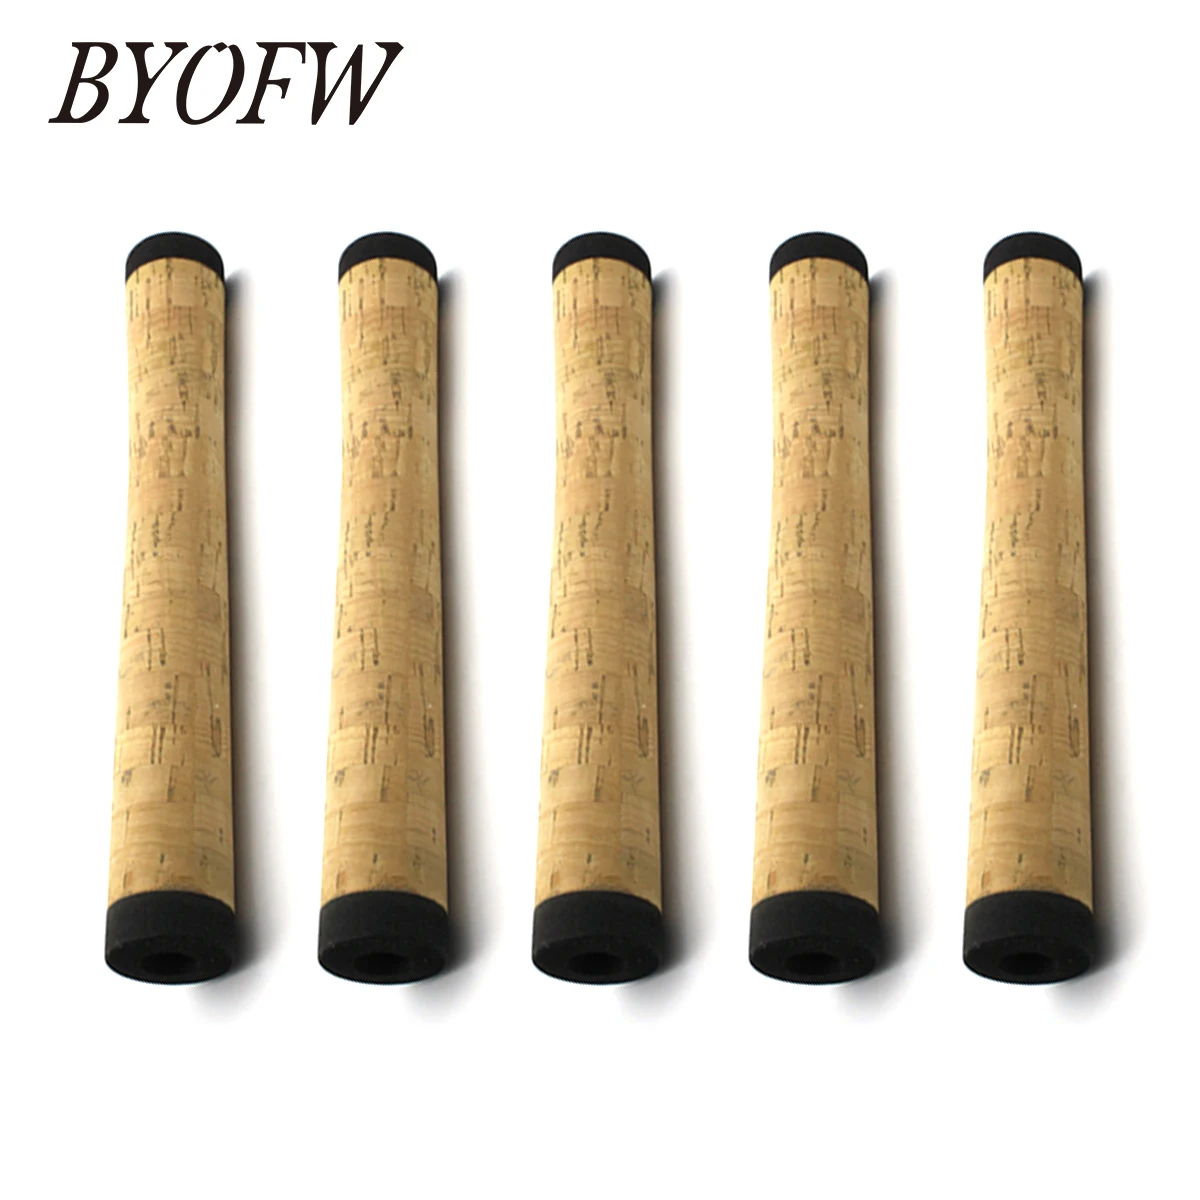 BYOFW 5 PCs 195mm Composite Cork Spinning Fishing Rod Handle Grip Strength  DIY For Pole Building Repair Ultra Light Replacement